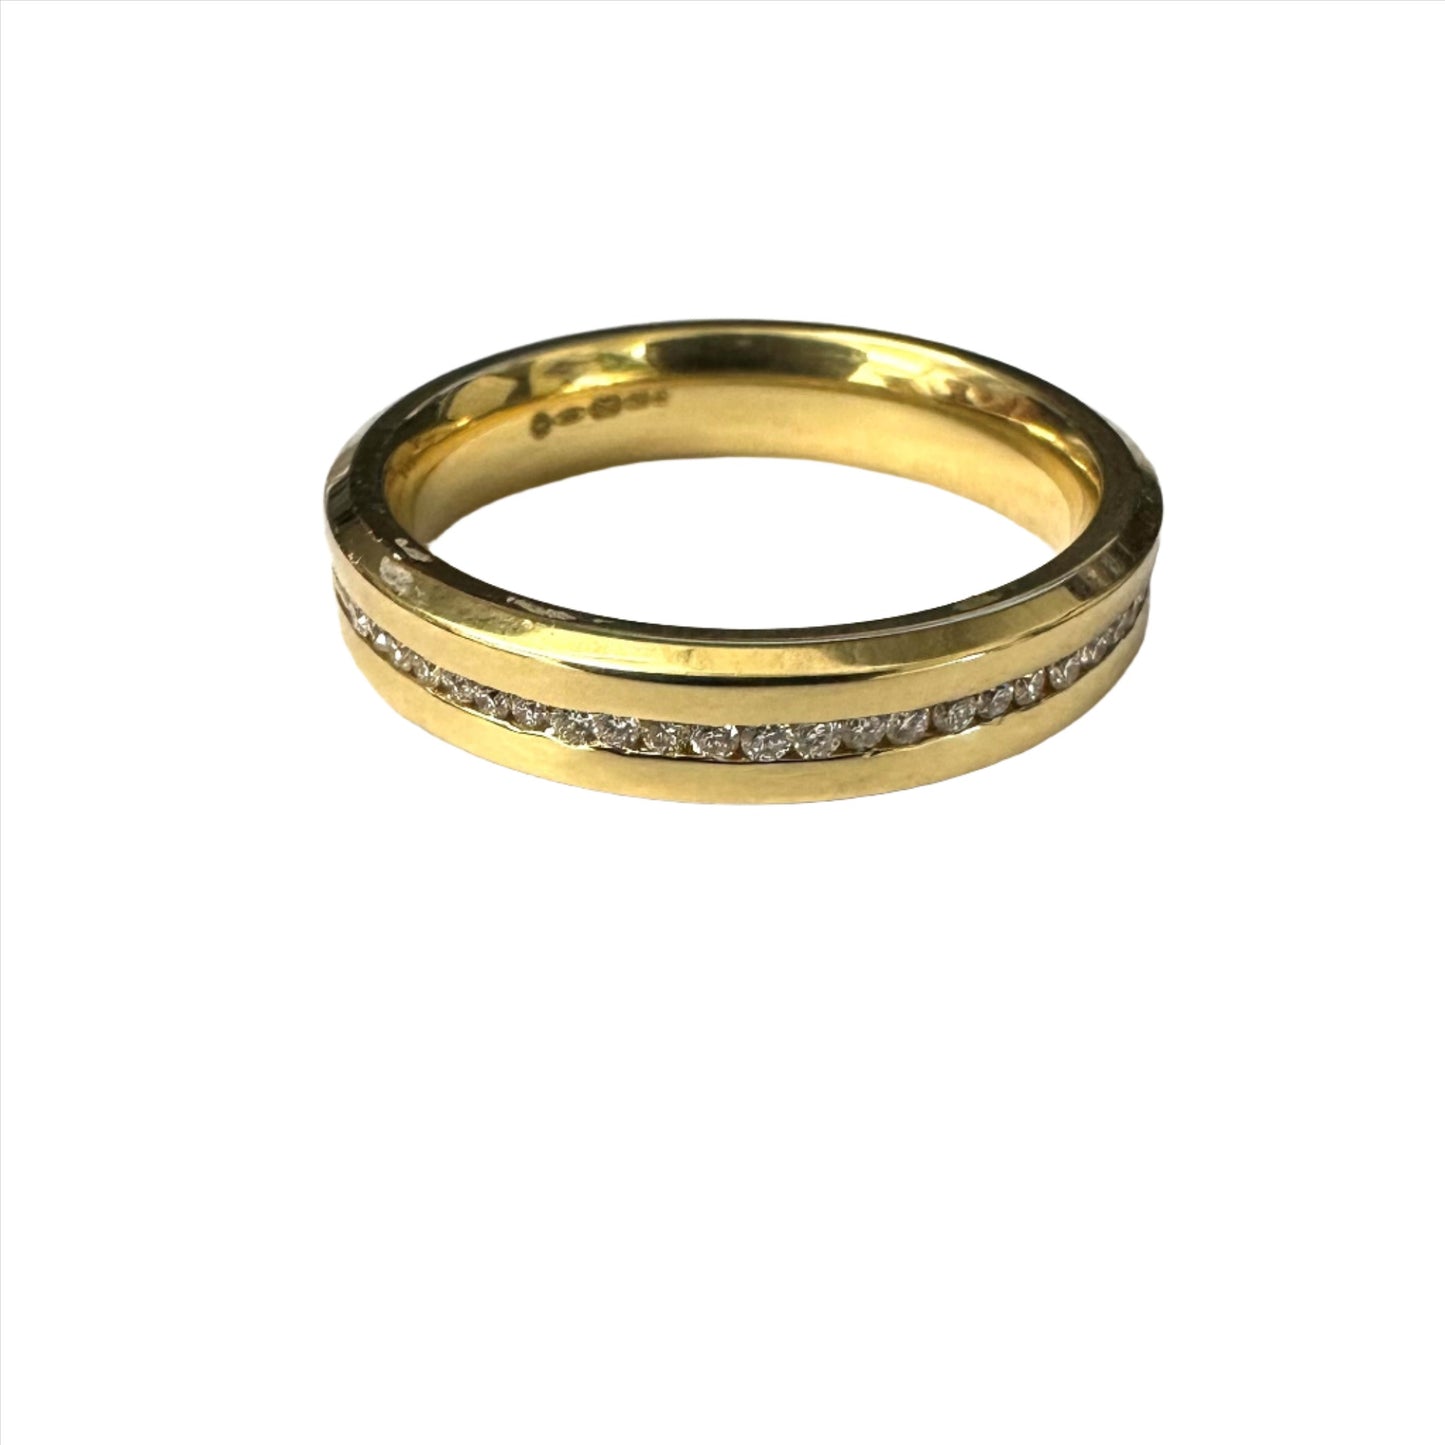 Timeless gold and diamond wedding ring